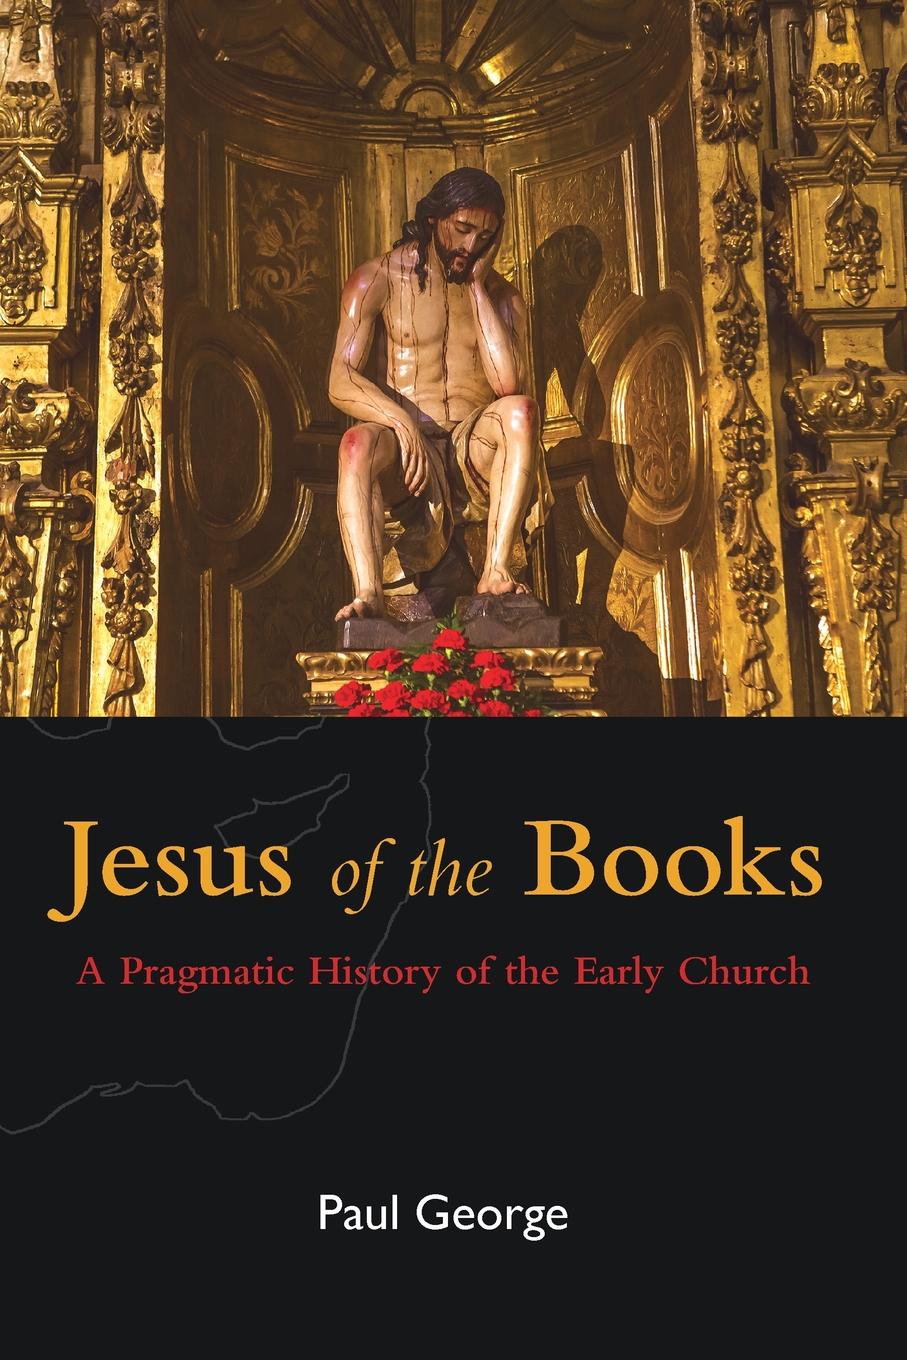 Jesus of the Books. A Pragmatic History of the Early Church